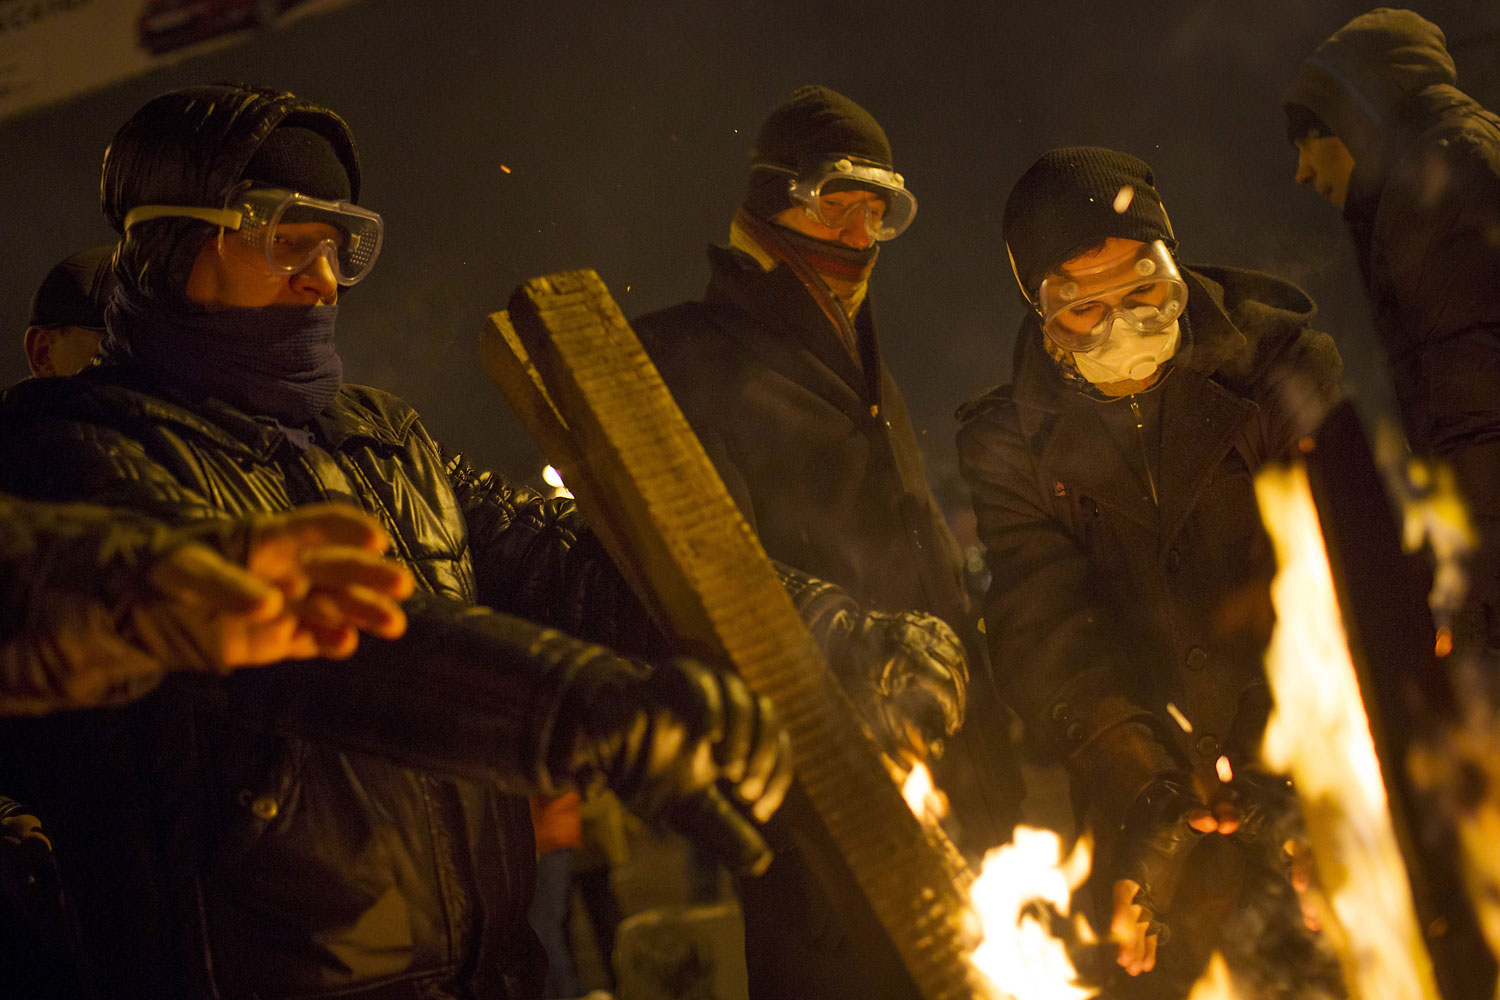 Protestors gather around a fire during a stand off with police on Jan. 23, 2014 in Kiev.